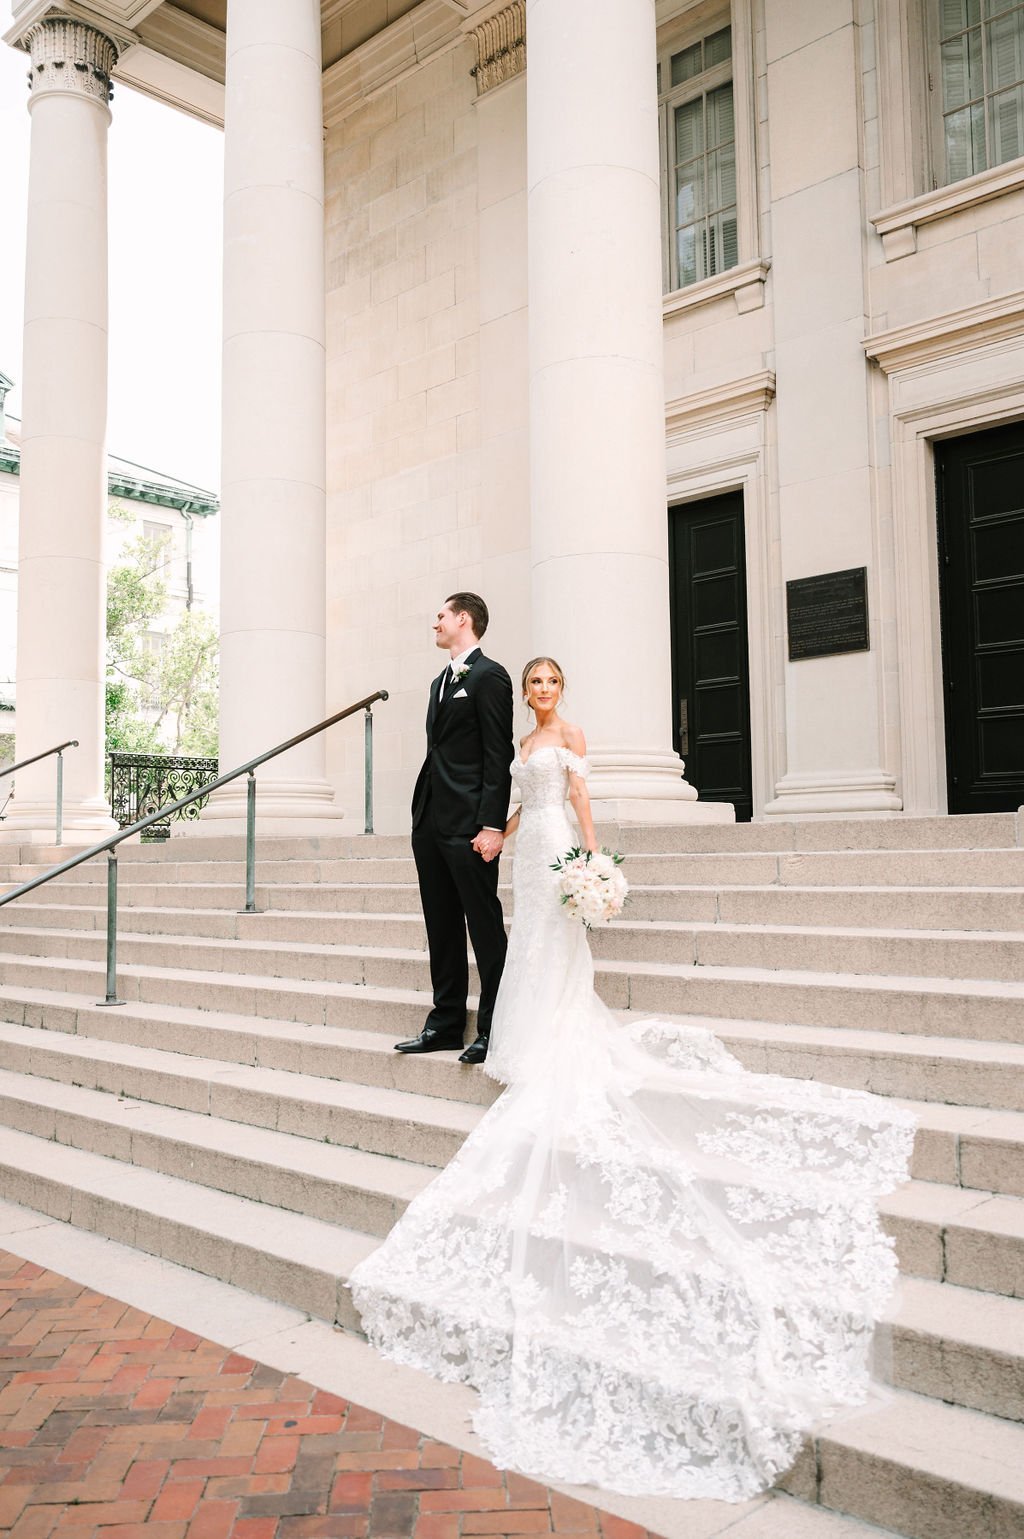 hayley-and-chris-romantic-rooftop-wedding-at-the-perry-lane-in-savannah-ga-featuring-organic-lush-wedding-florals-designed-by-ivory-and-beau-10.jpg